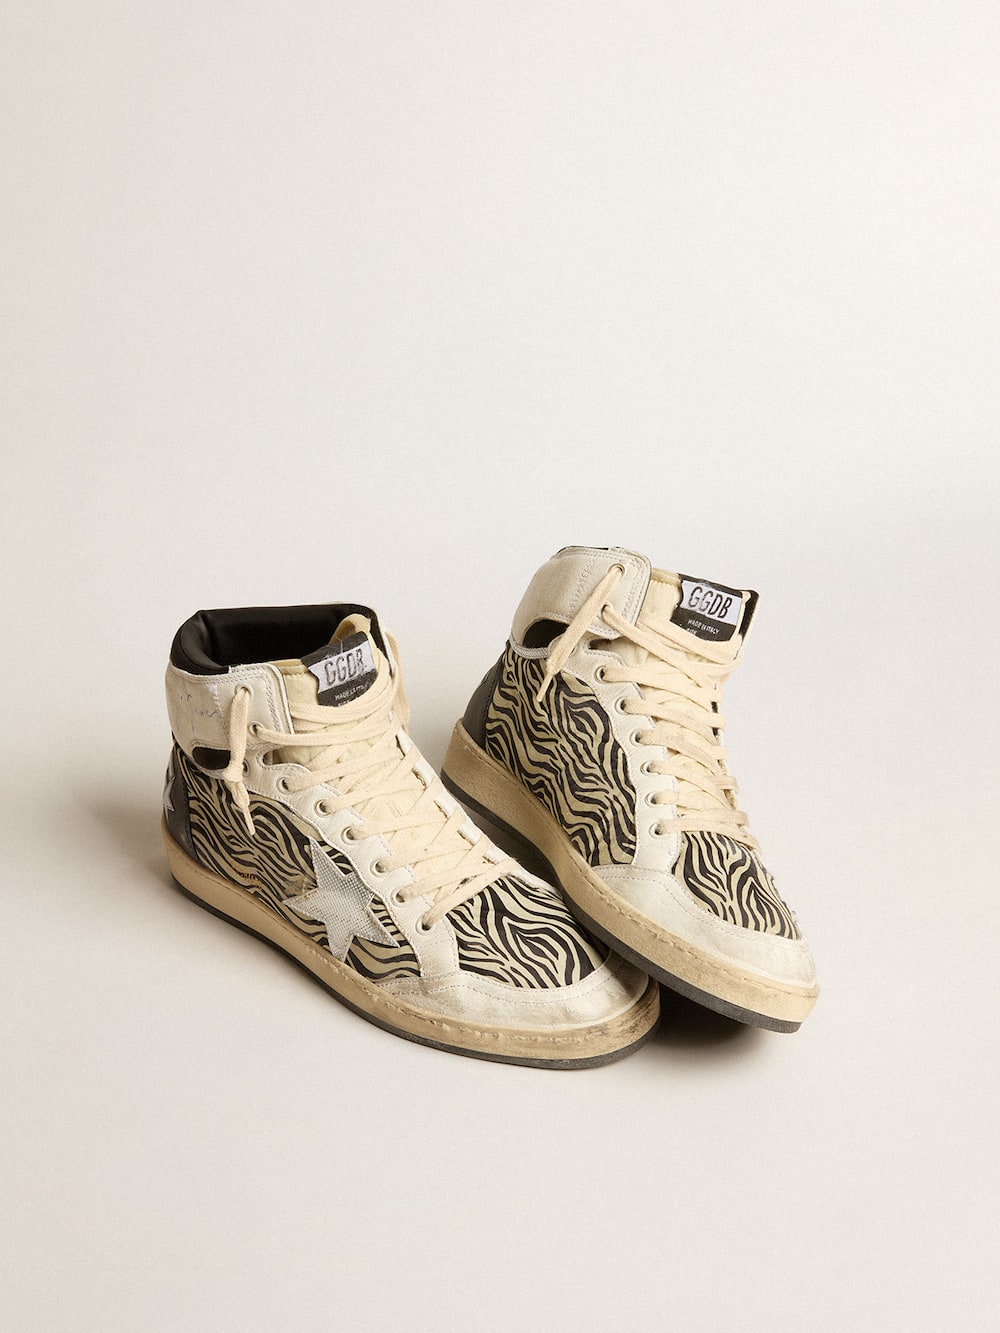 Golden Goose - Women’s Sky-Star LAB in zebra nappa with textured silver leather star in 